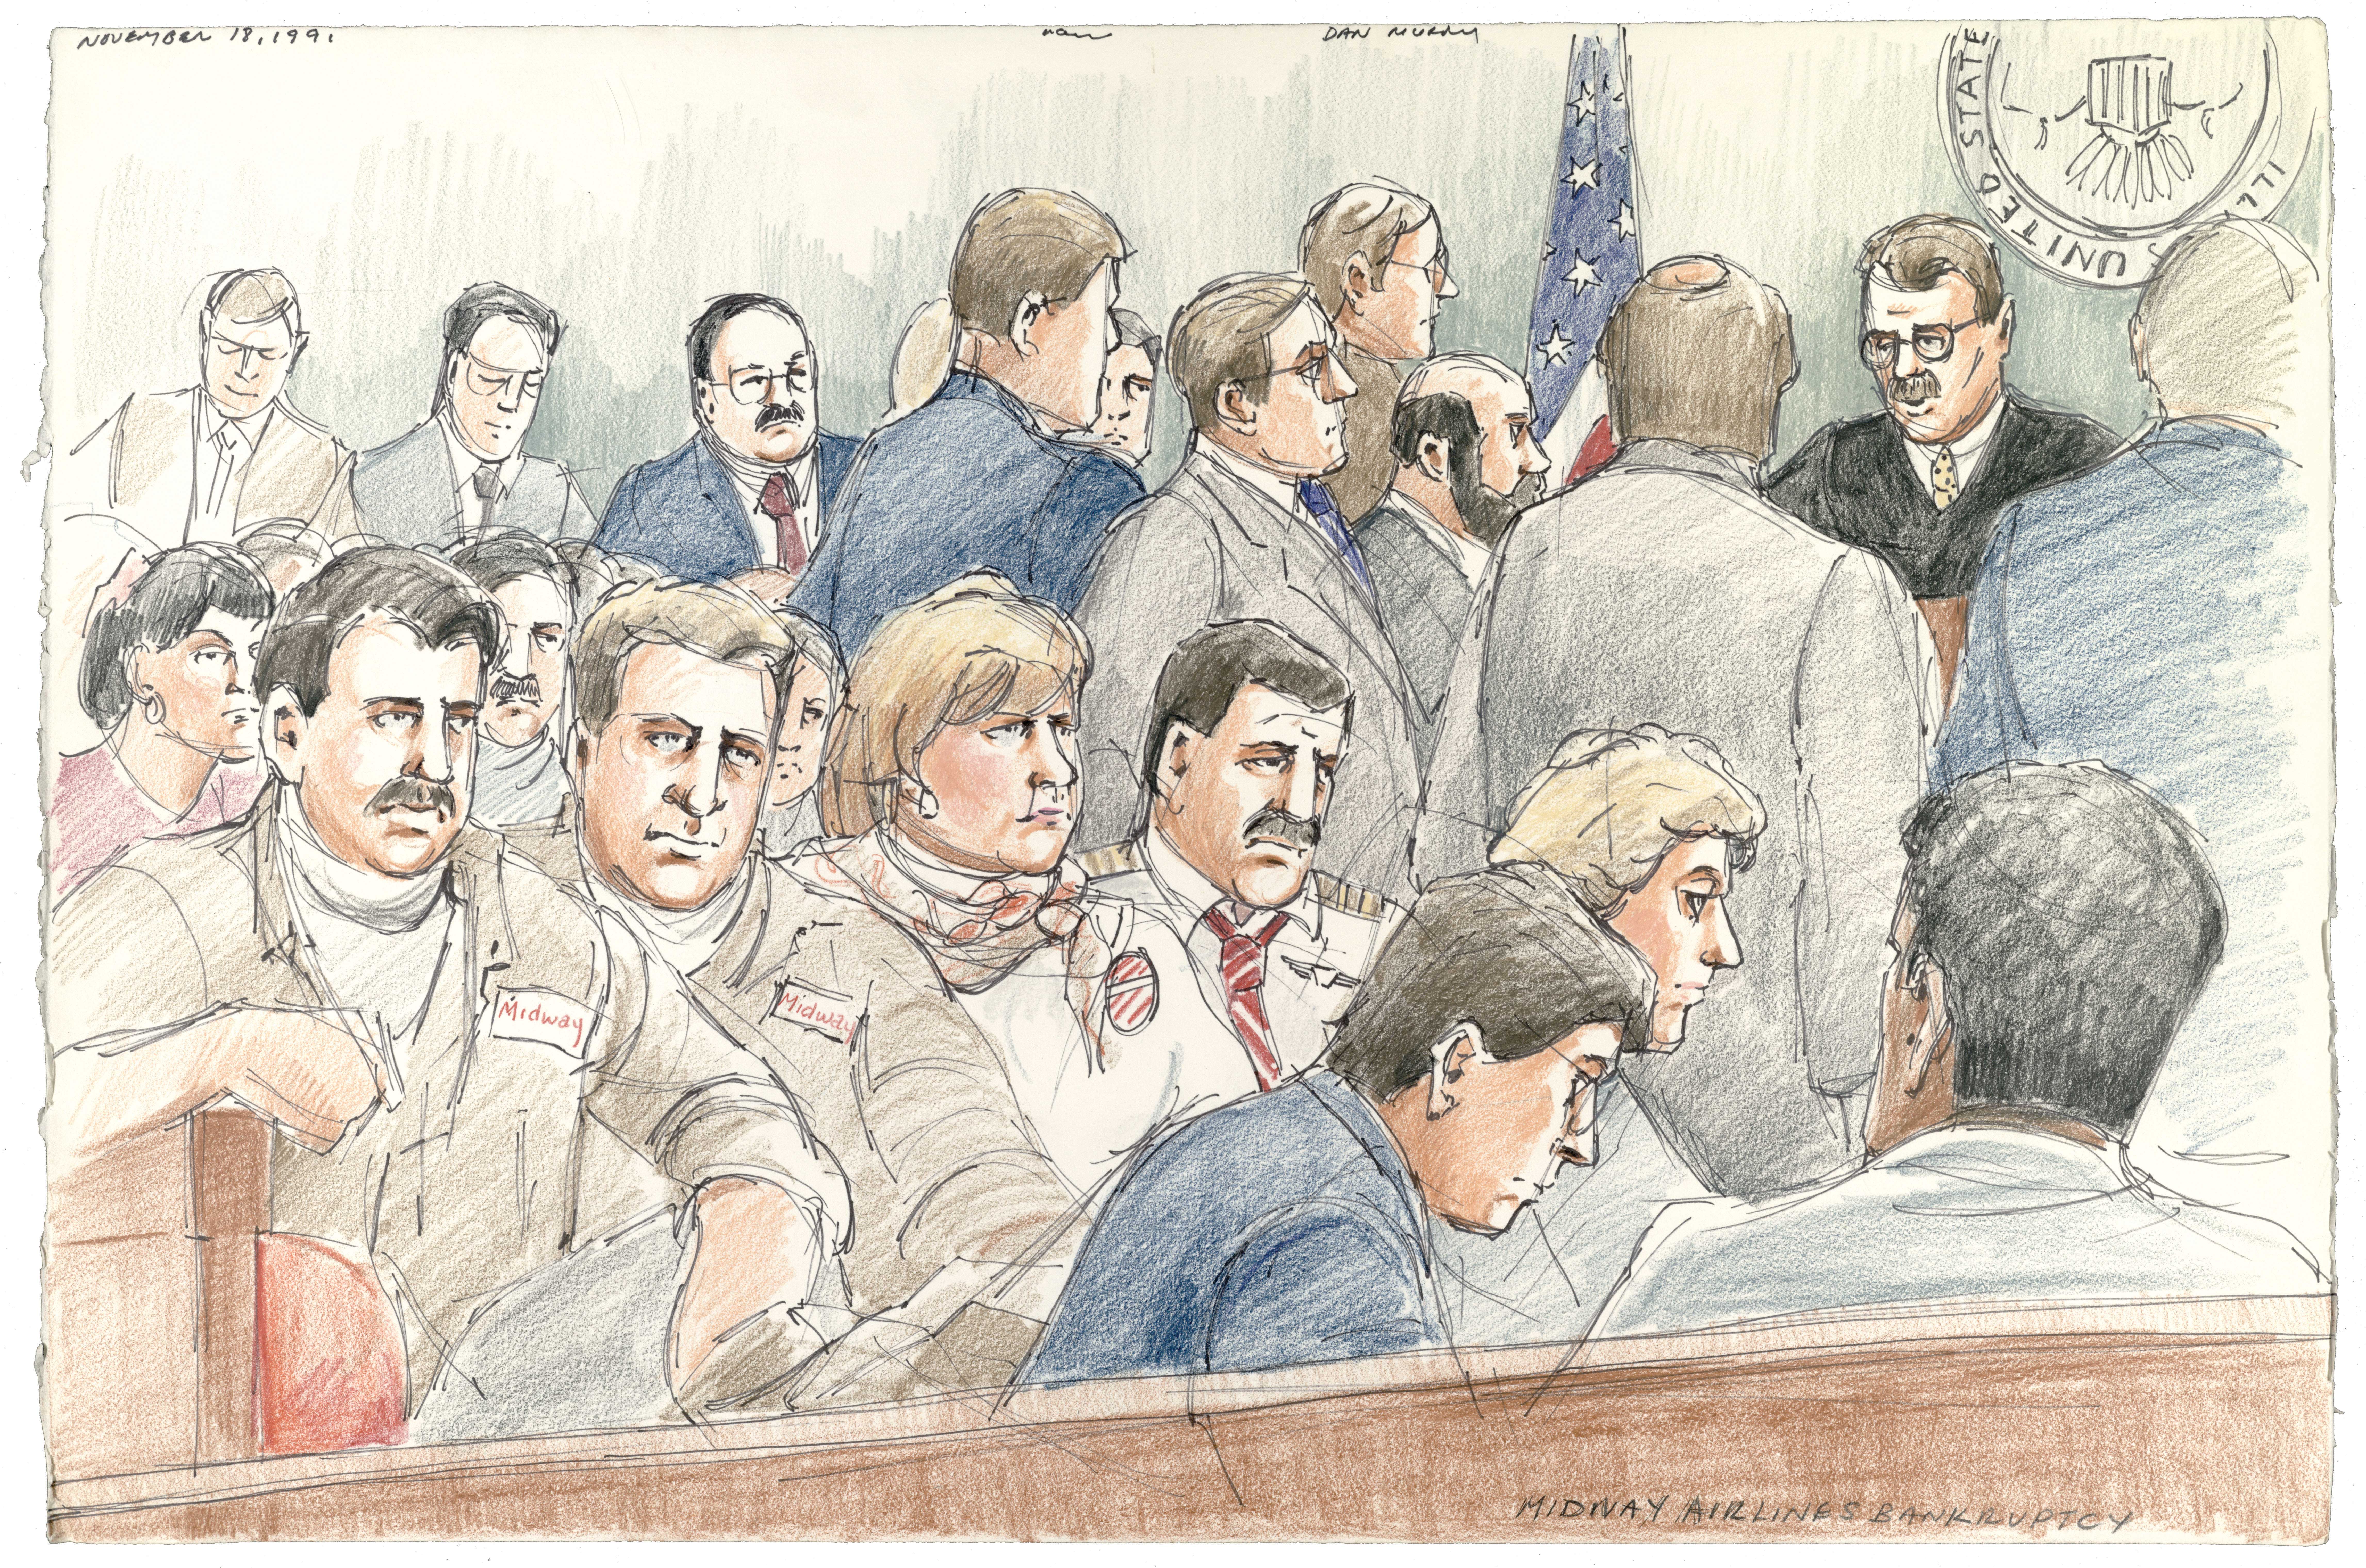 Midway Airlines Bankruptcy Trial, 1991